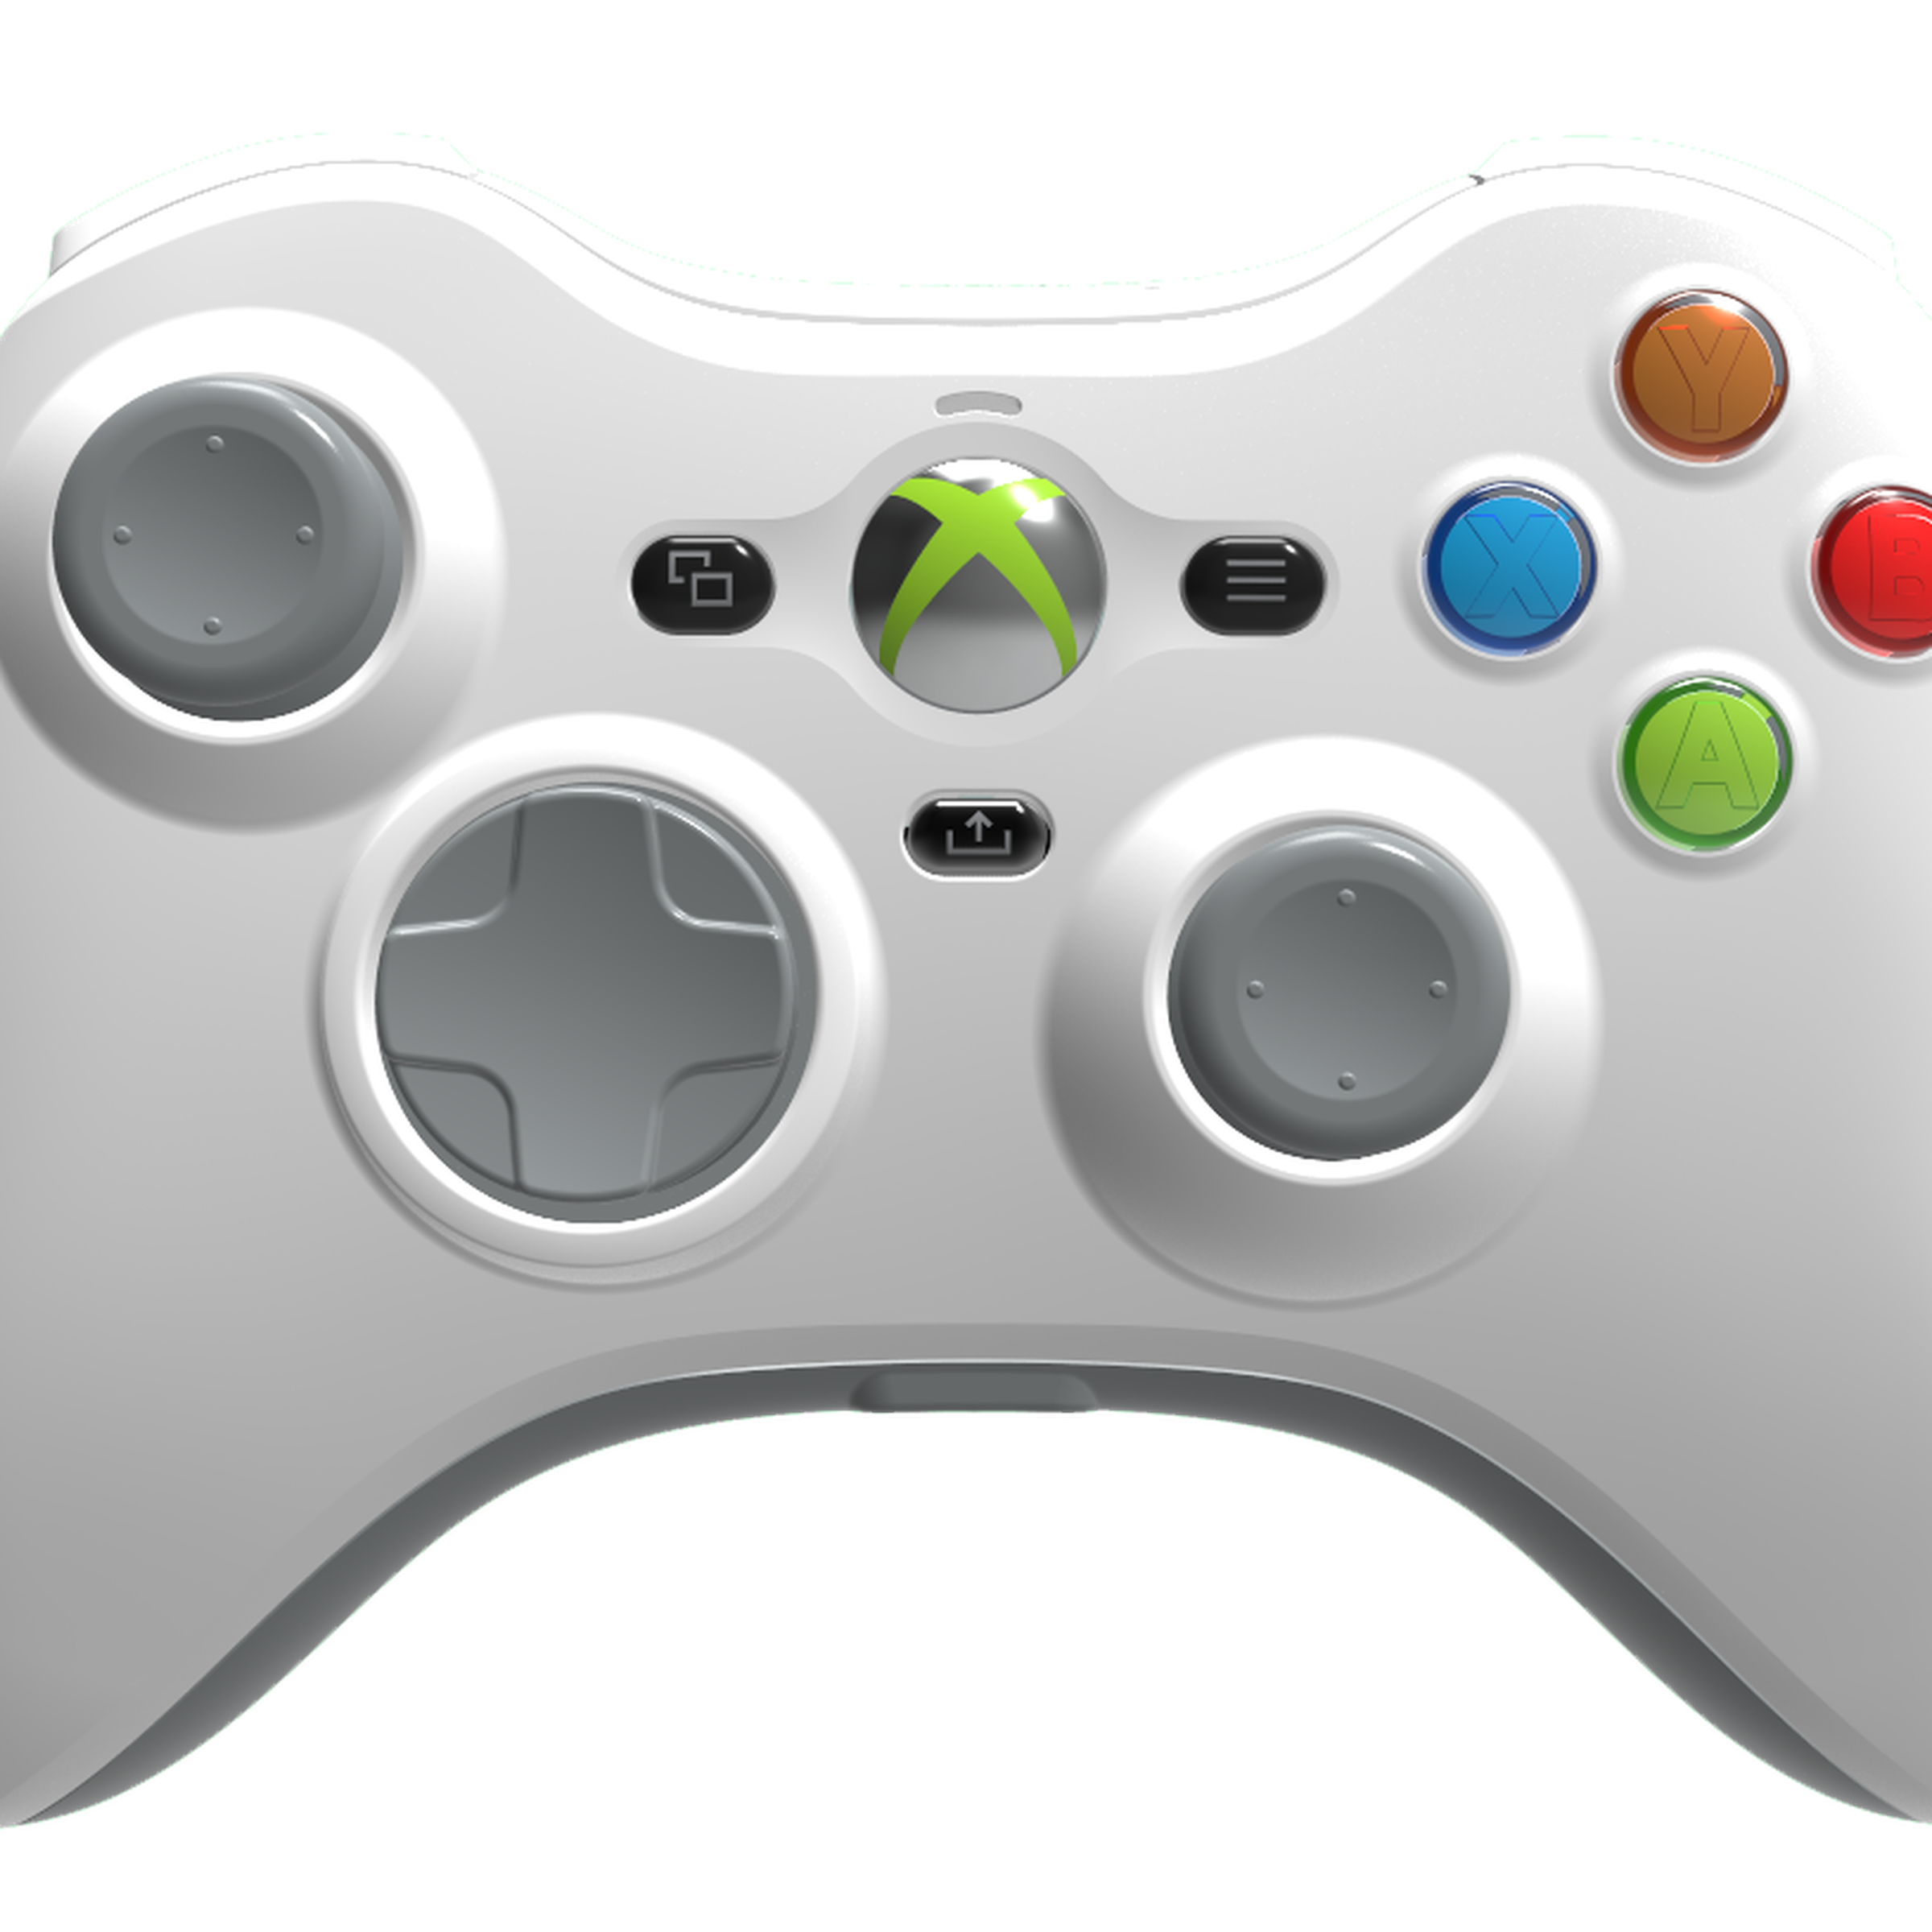 A render of a white Xbox 360 controller.